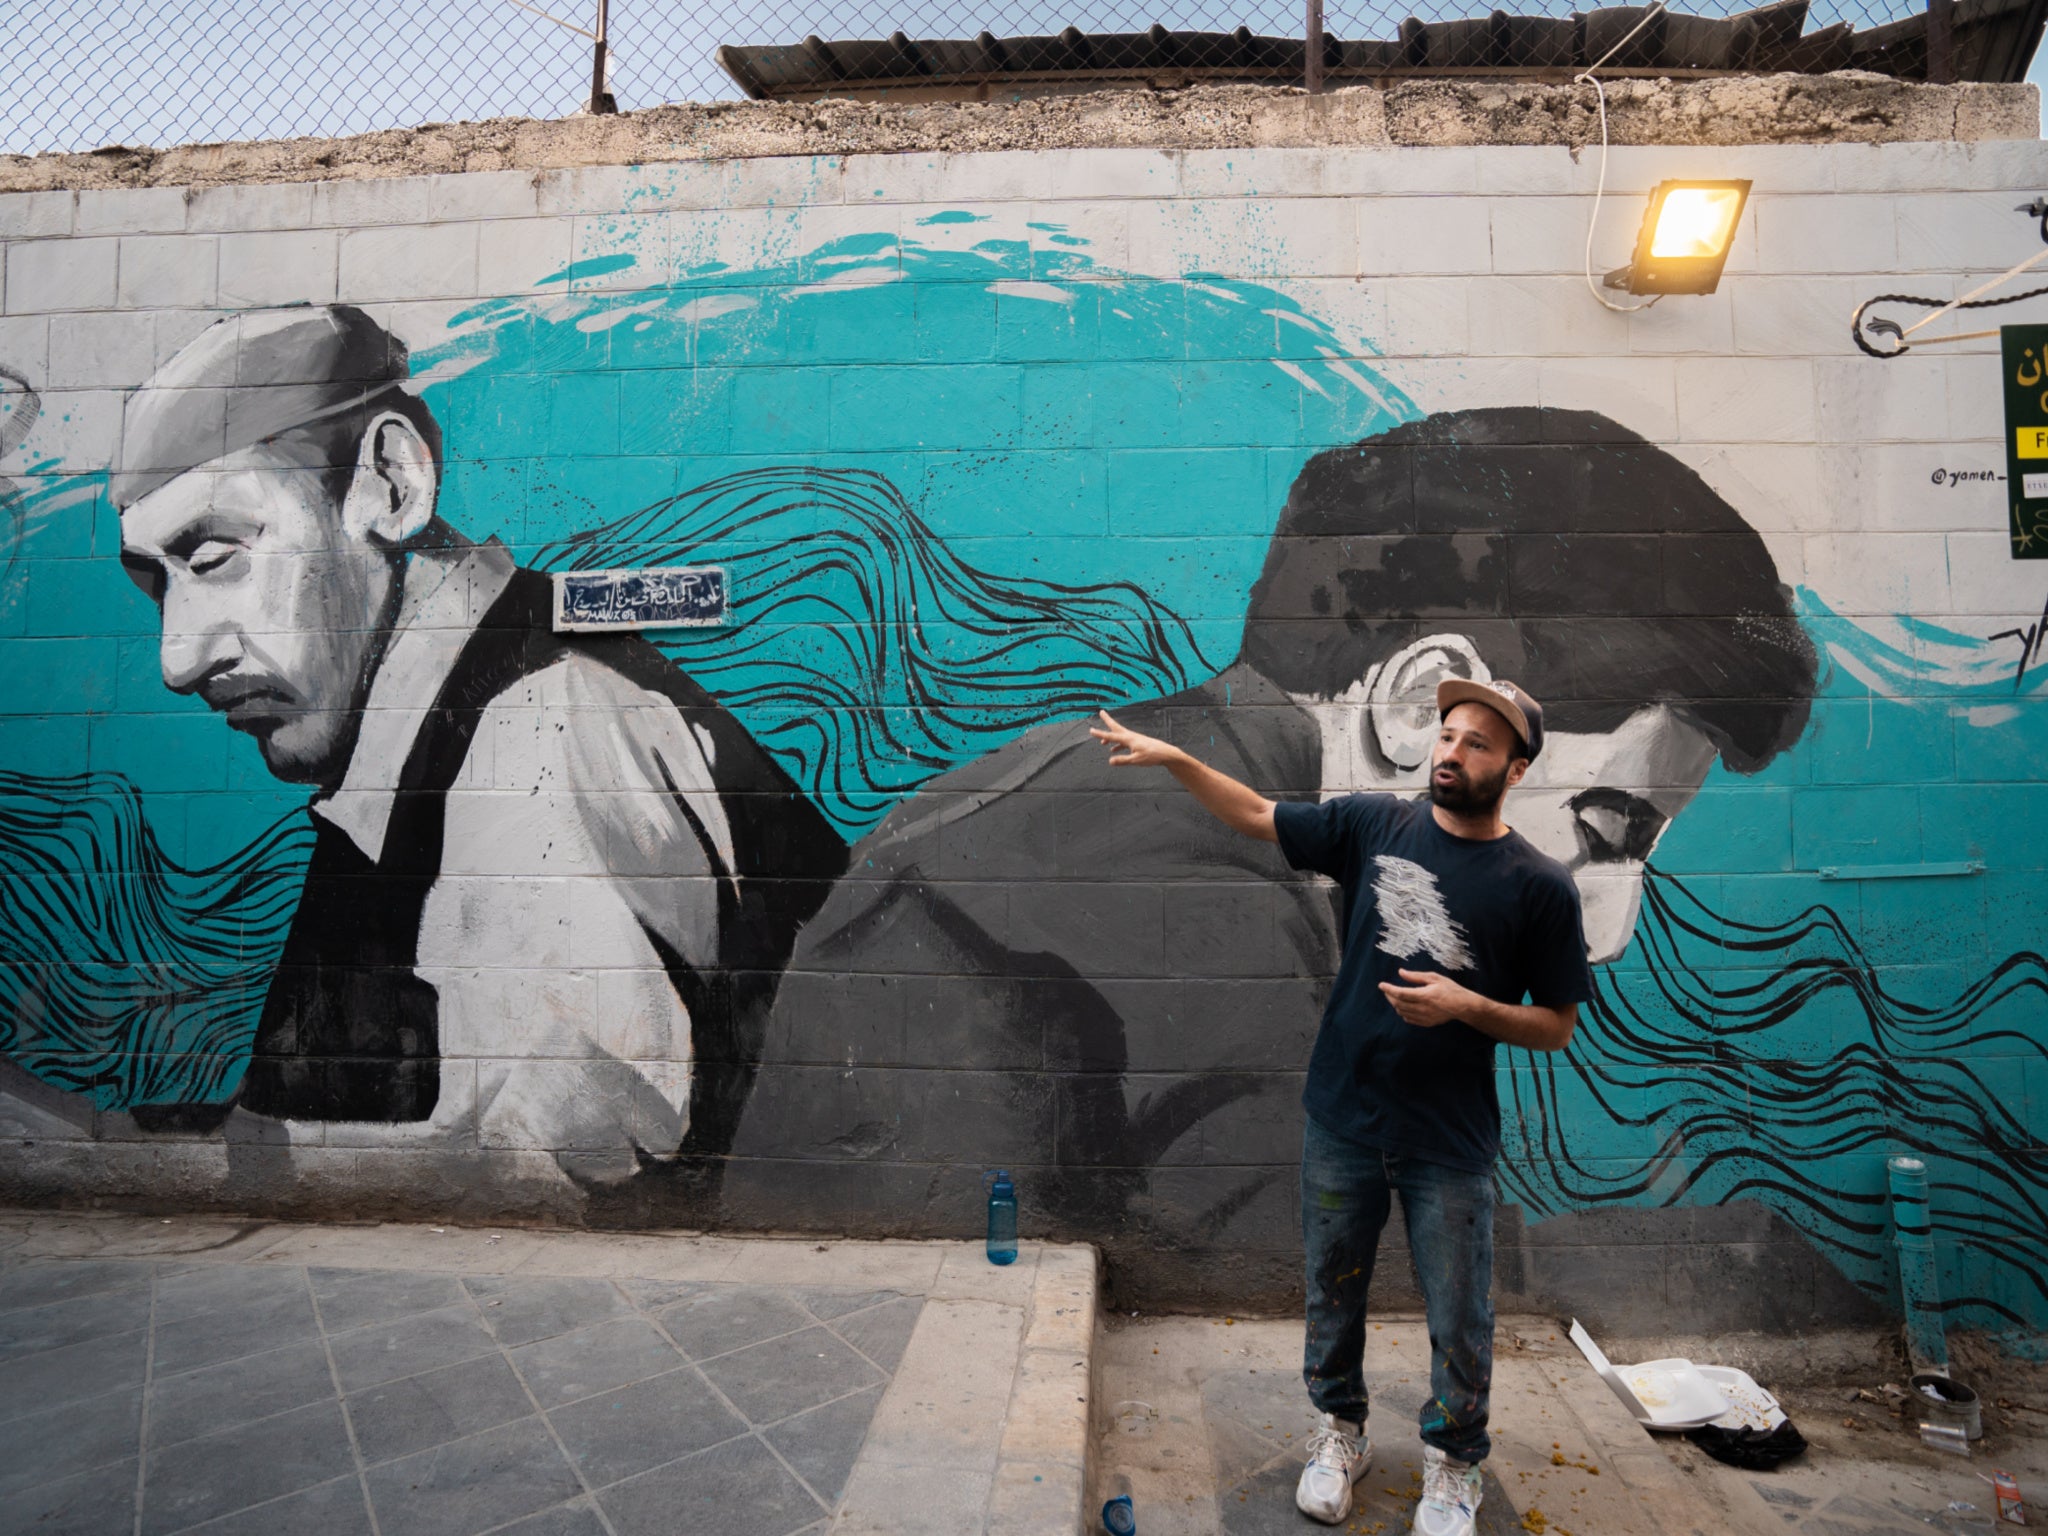 The Underground Amman tour explains the story behind some spectacular street-art murals